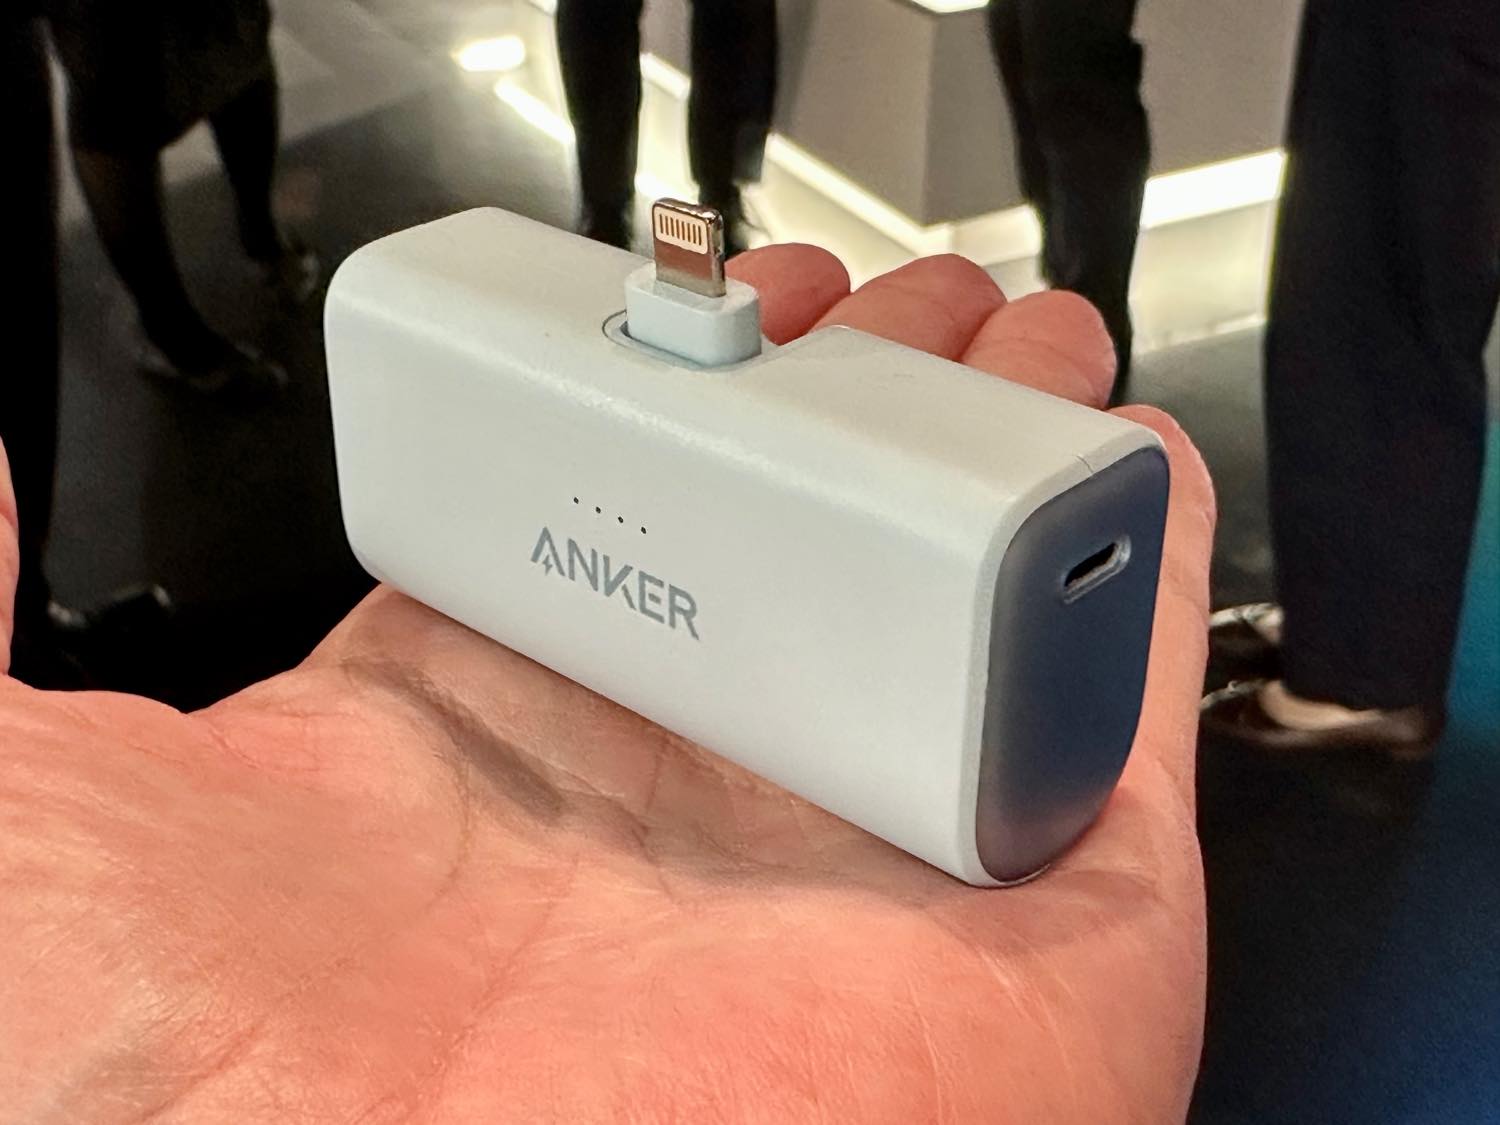 Anker、Lightningコネクタを内蔵したコンパクトなモバイルバッテリー｢Anker 621 Power Bank (Built-In Lightning Connector, 12W)｣を発表